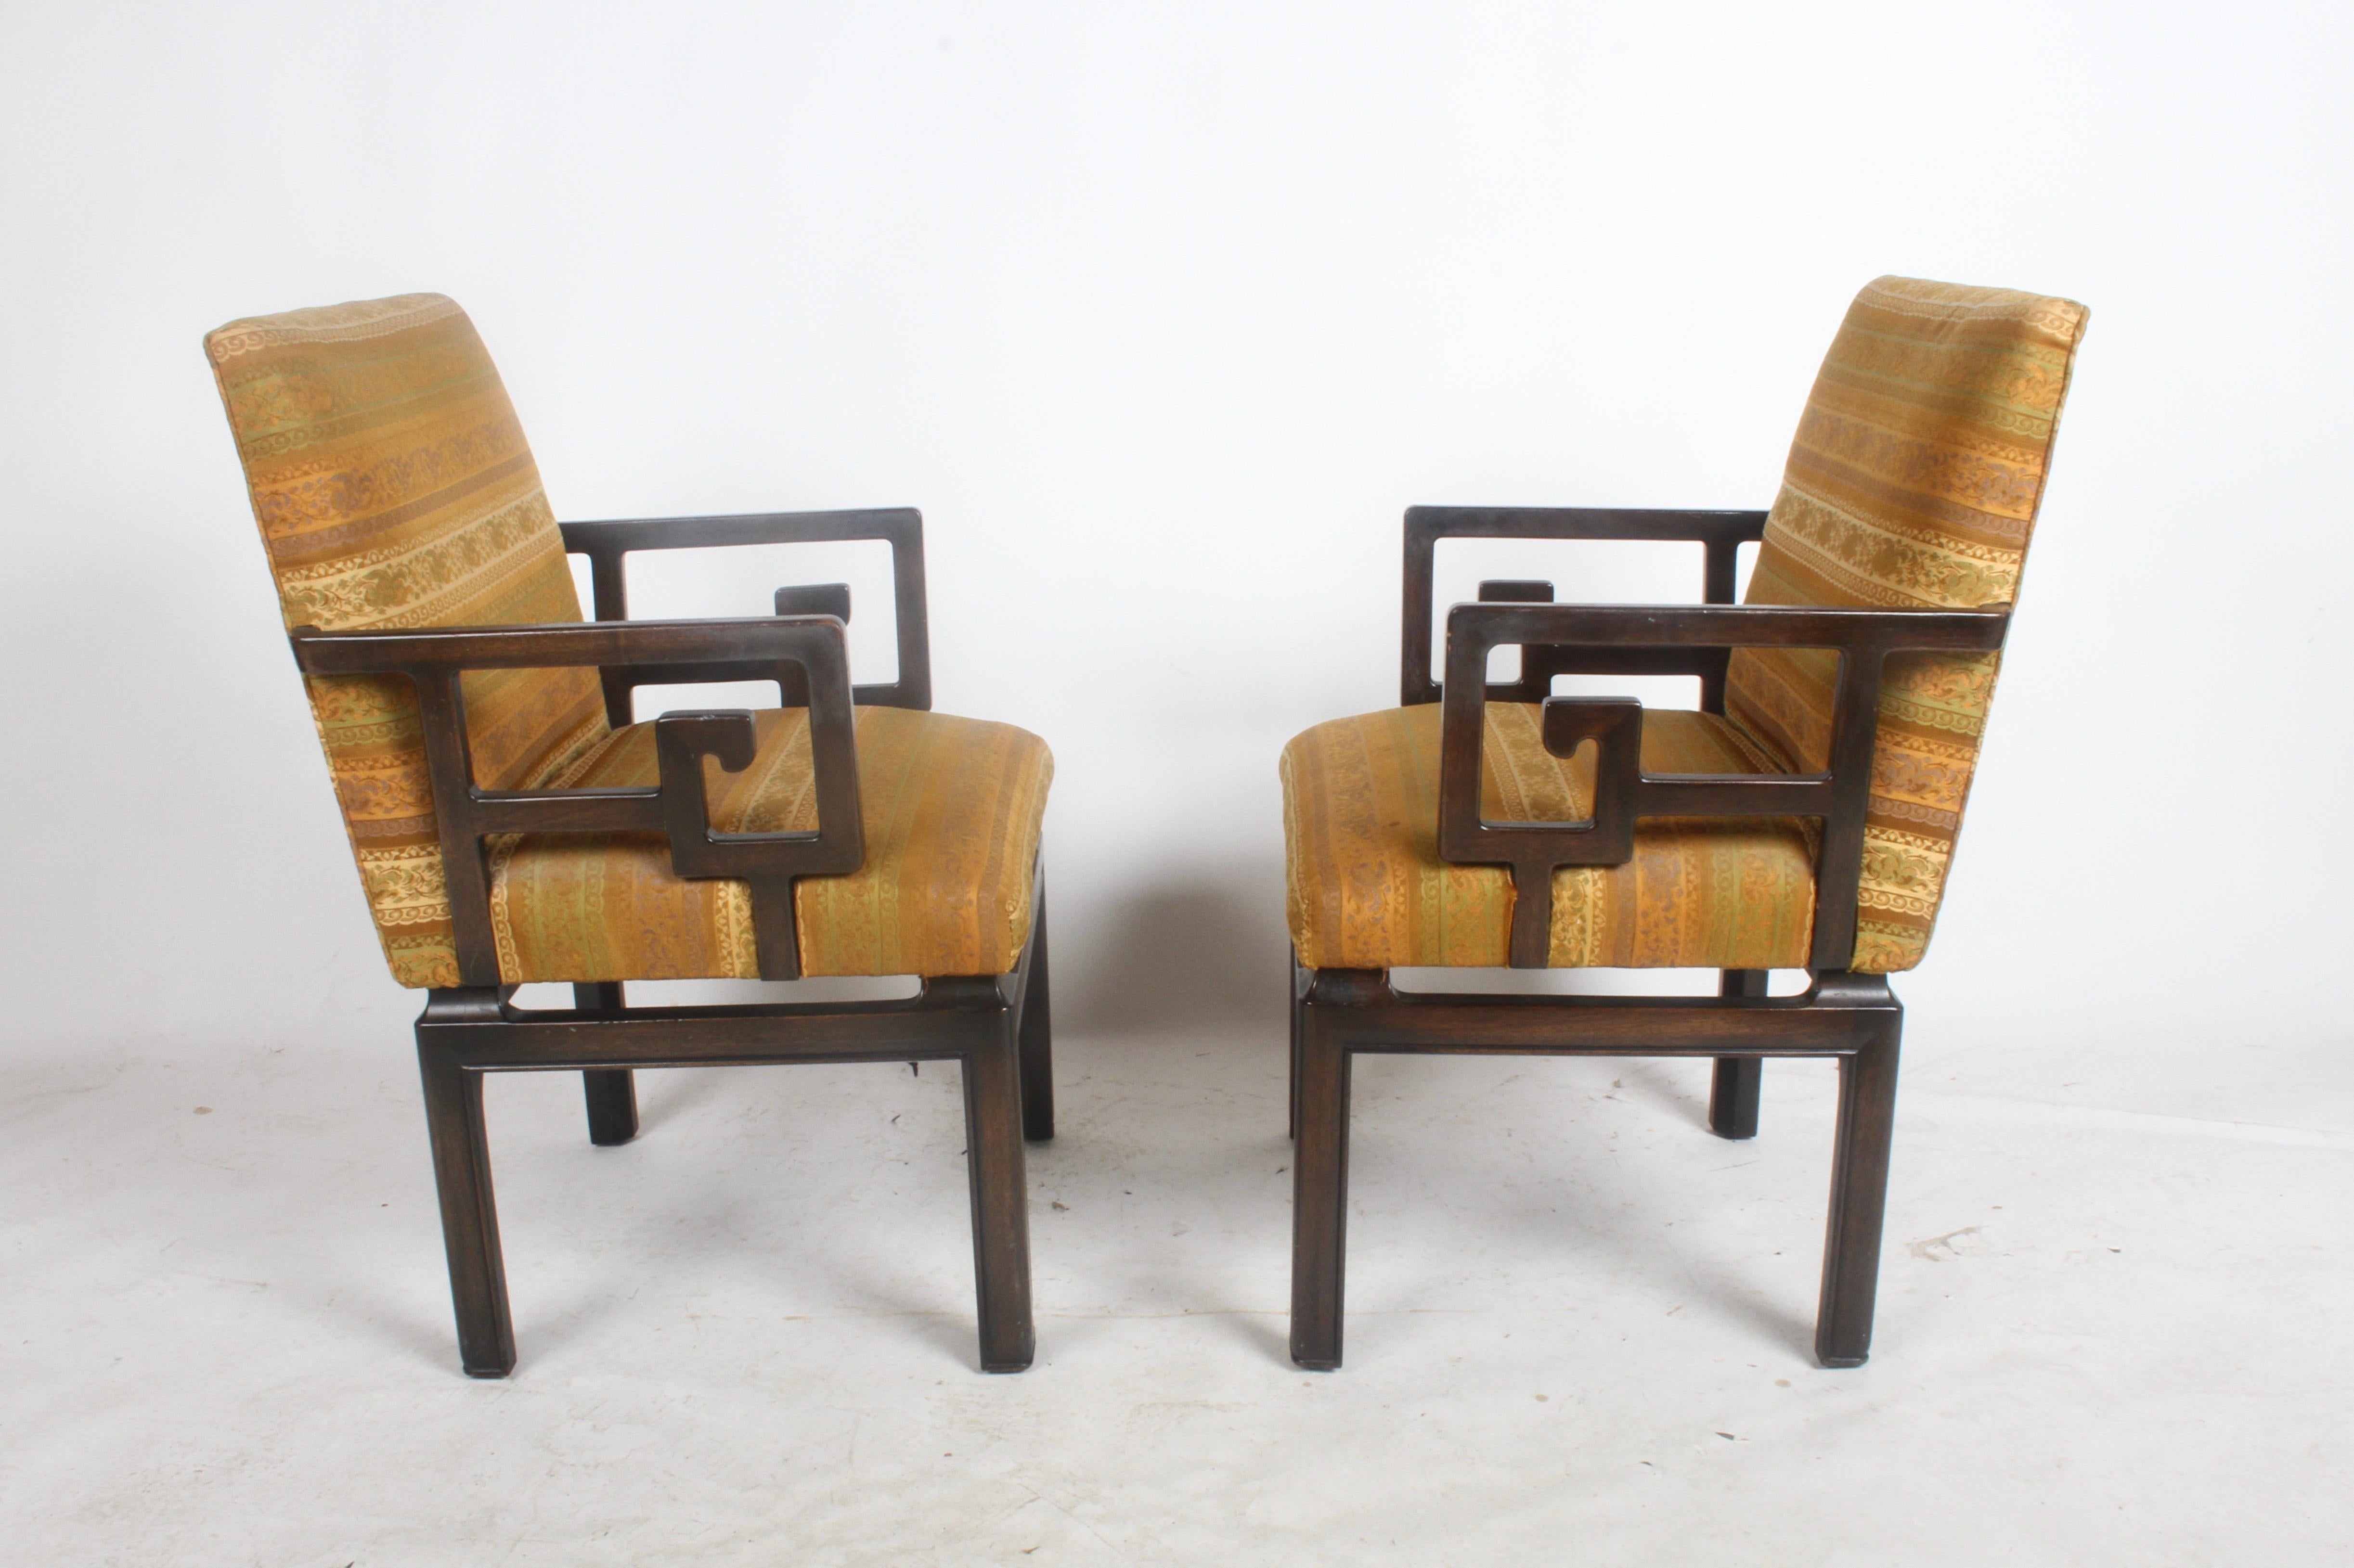 I have two pairs of Greek Key chairs designed by Windsor White for the Baker Far East Collection, c.1960s. Only two are shown in original dark espresso finish and upholstery (should be refinished), the other two are in original black lacquer with